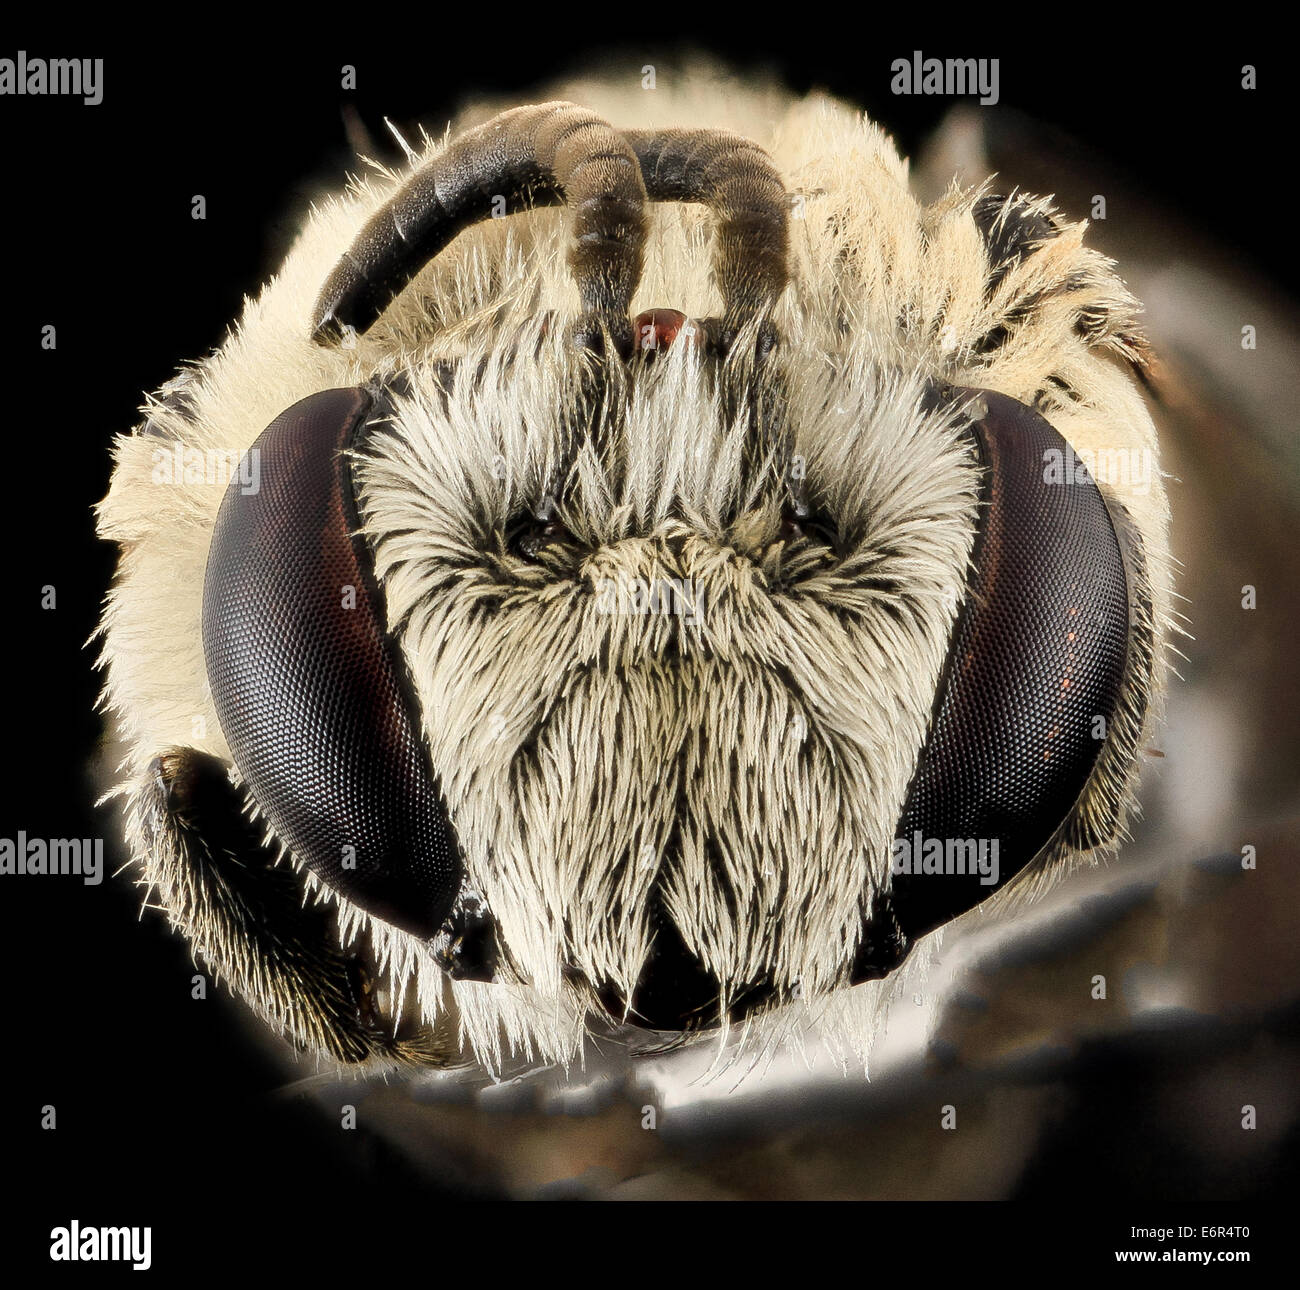 Colletes titusensis, M, Face, Brevard co, Honda, US 2013-11-19-080232 ZS PMax 10954951186 o Rarity here.  This is species was de Stock Photo